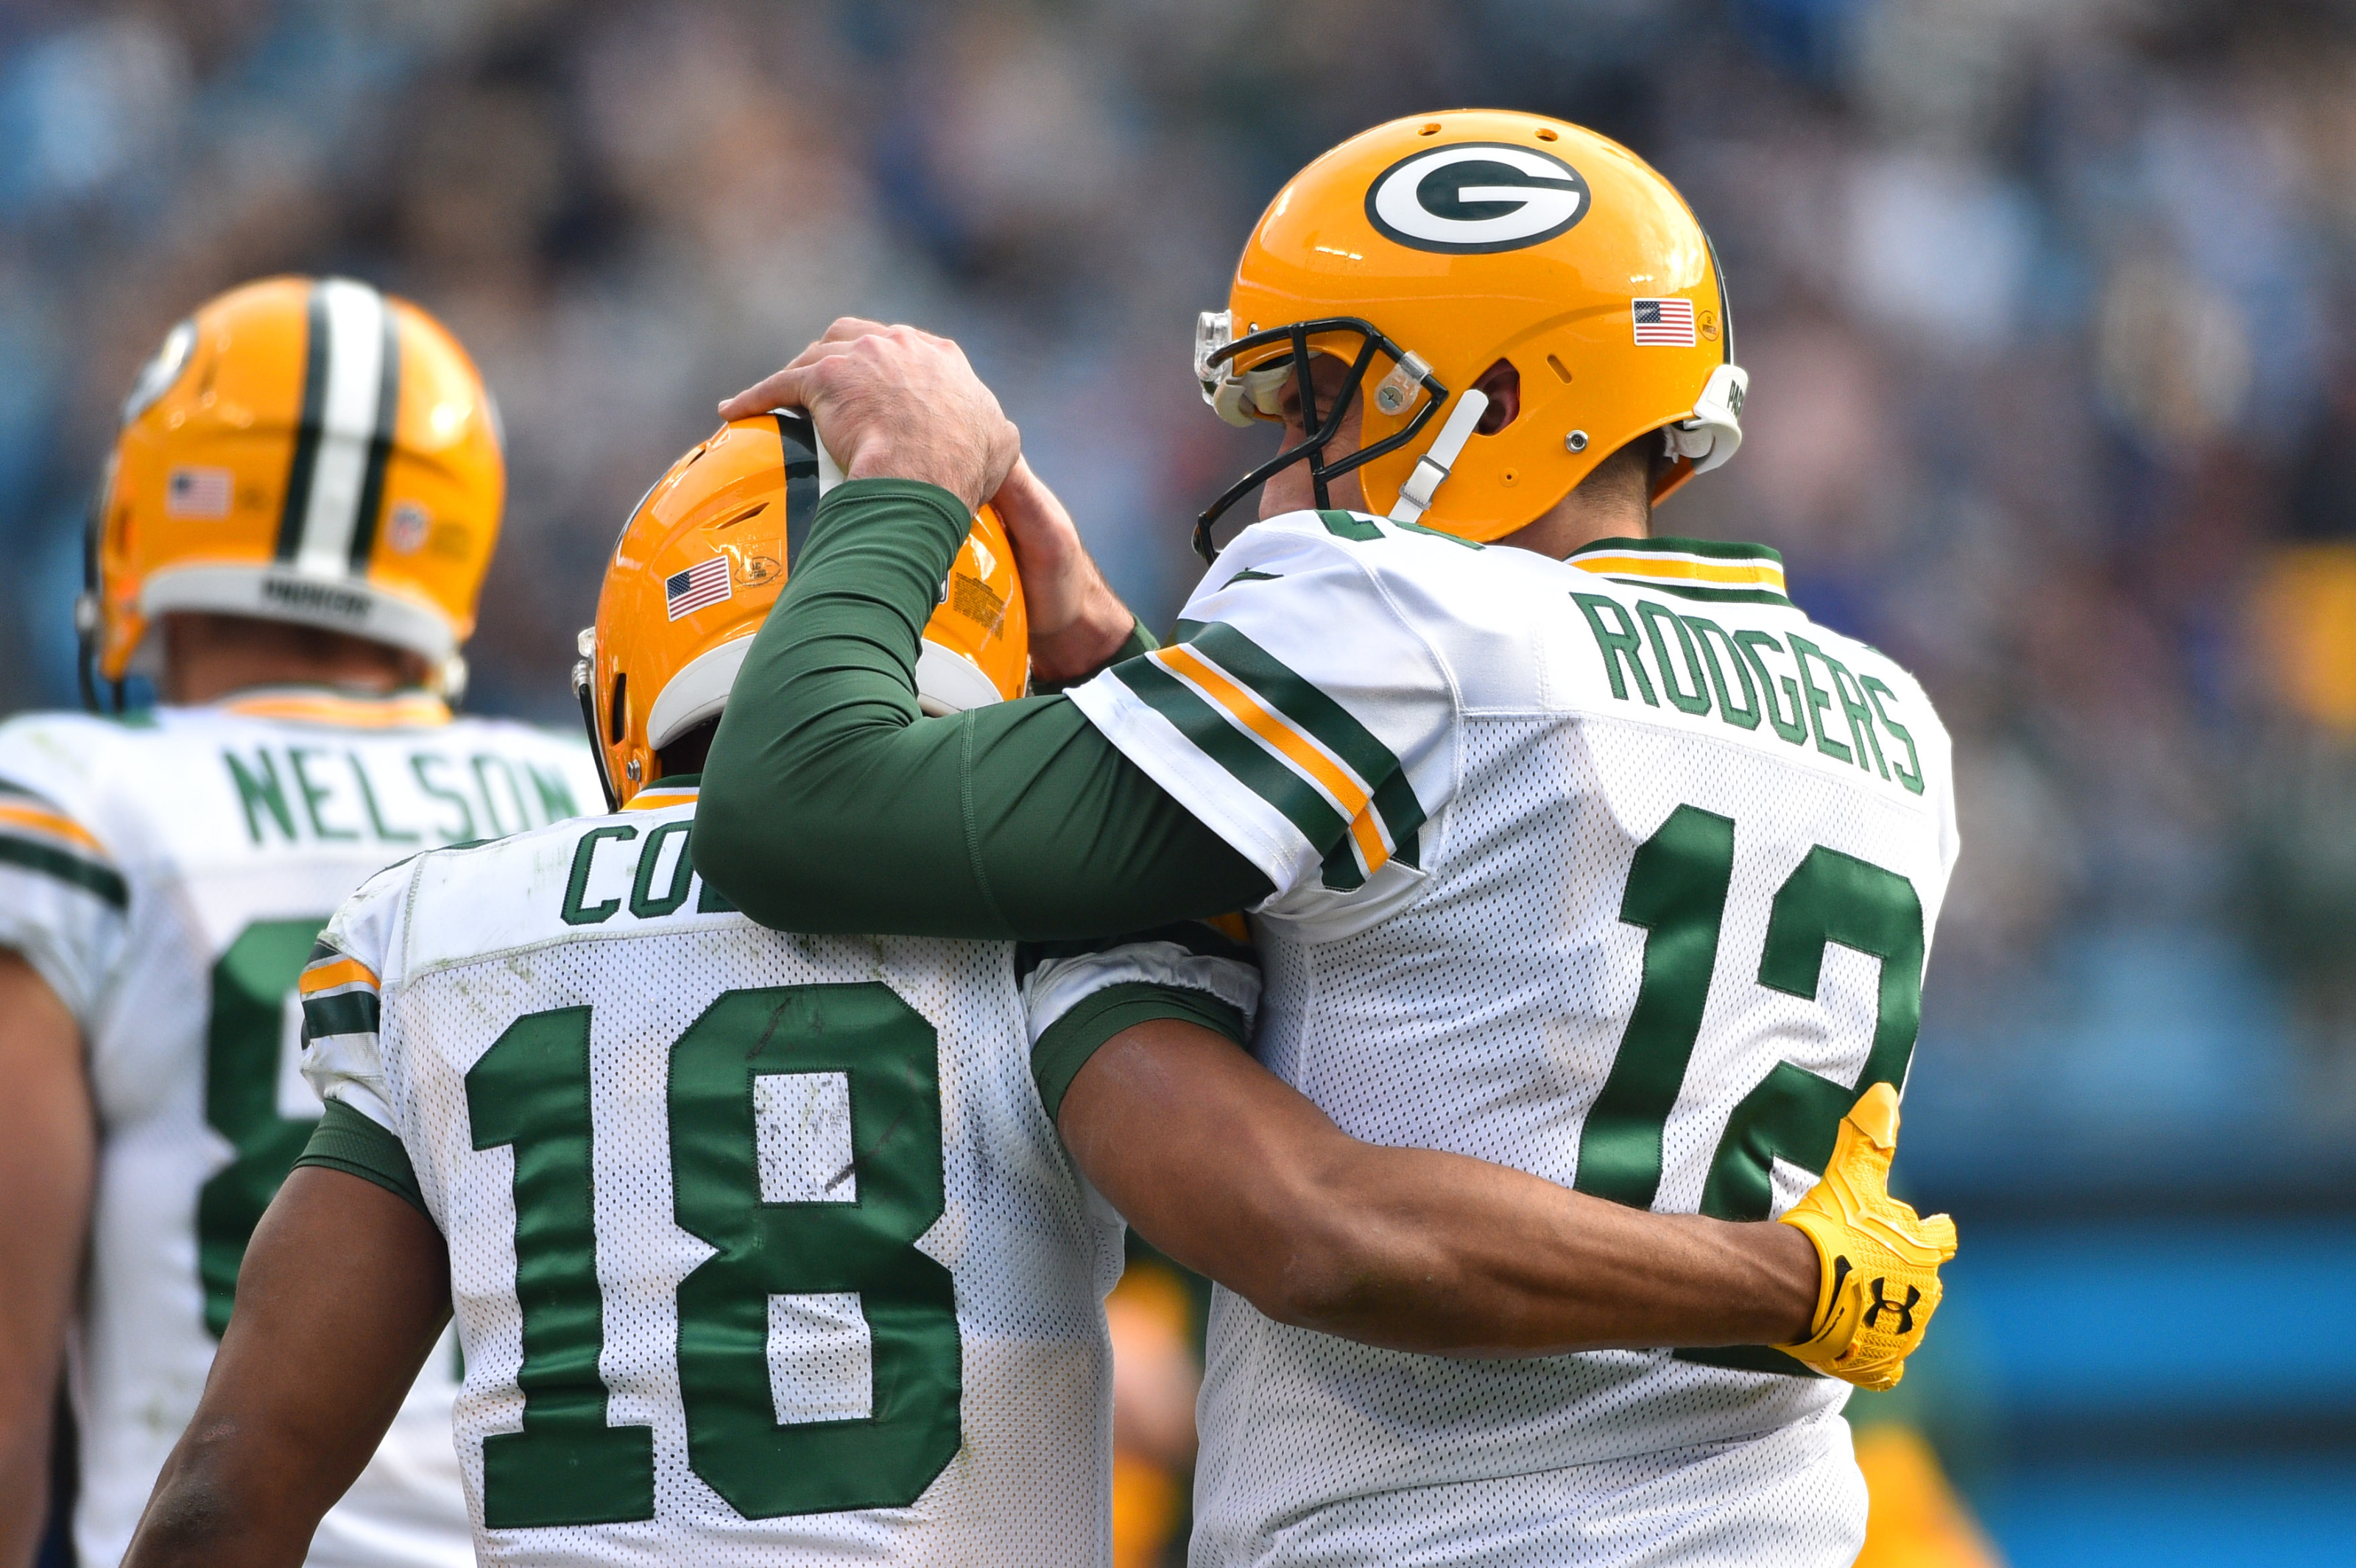 Aaron Rodgers reuniting with Randall Cobb would be a huge deal